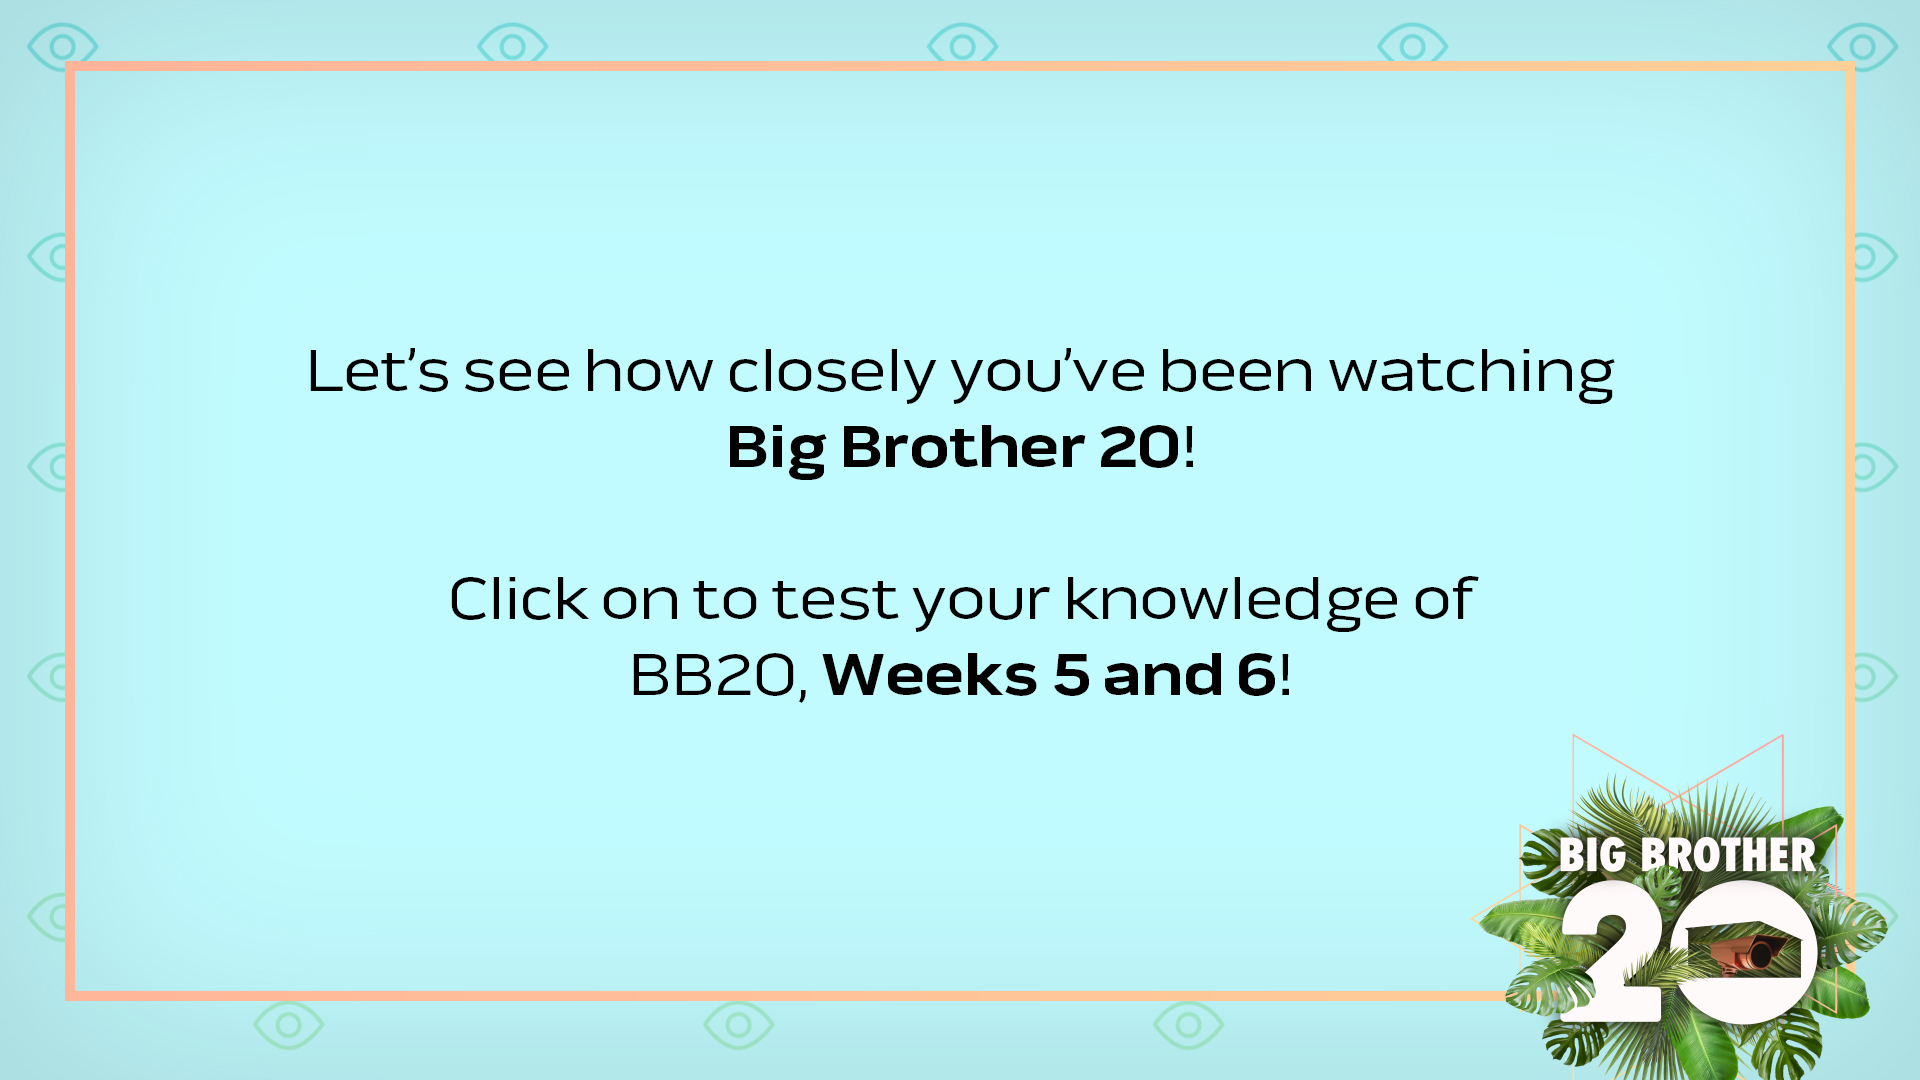 How closely have you been watching Big Brother?